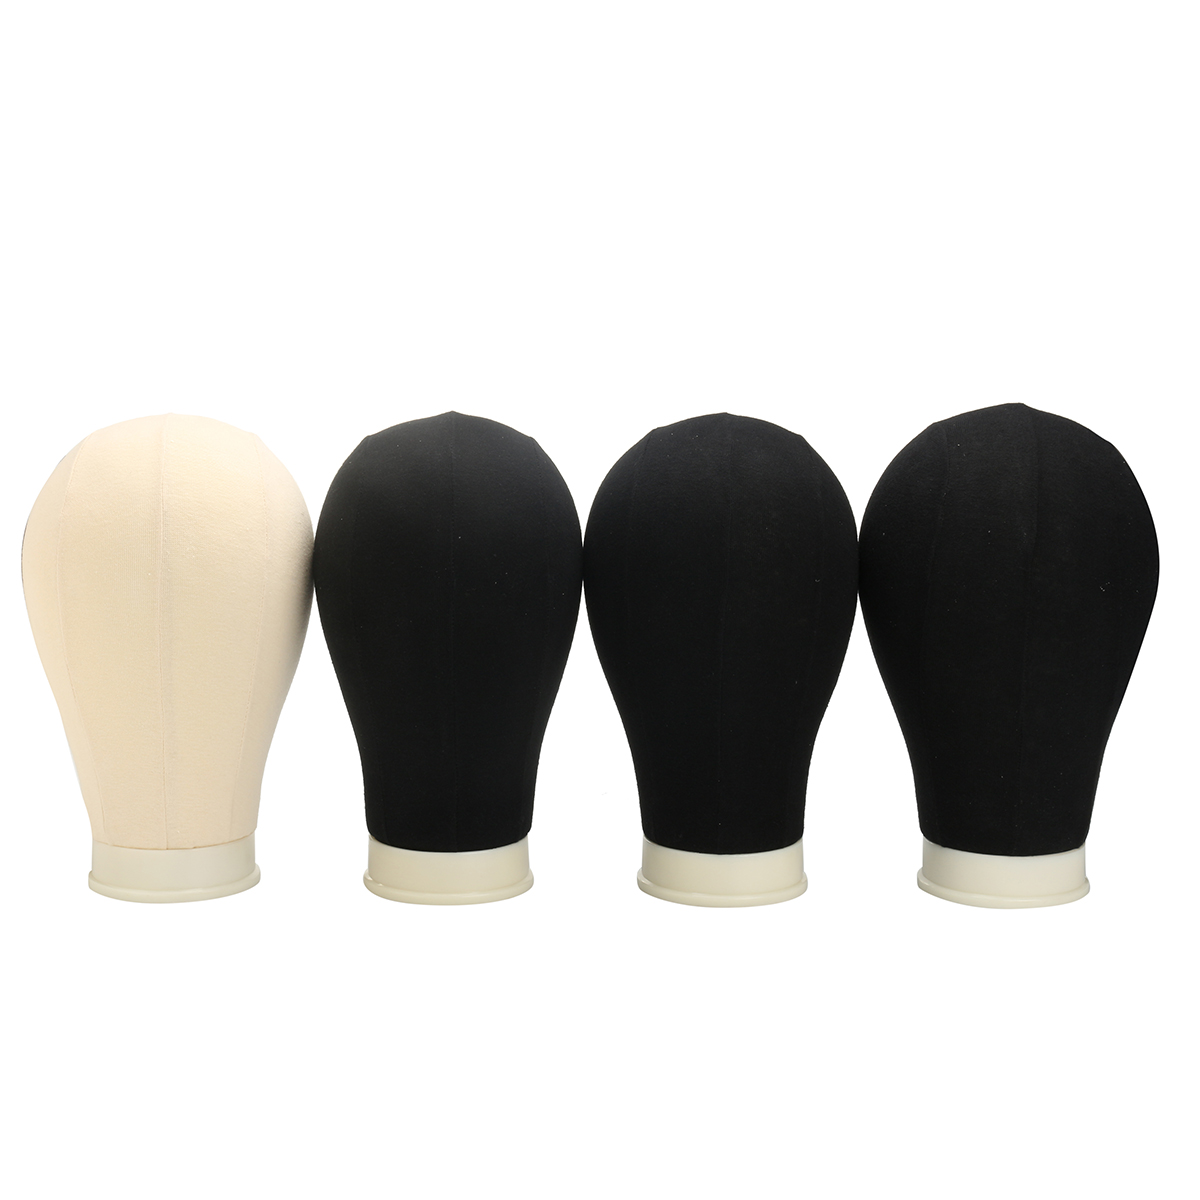 20-25-Canvas-Block-Head-Set-with-Mount-Hole-Plate-Mannequin-Model-Cap-Wigs-Jewelry-Display-Stand-1445404-2